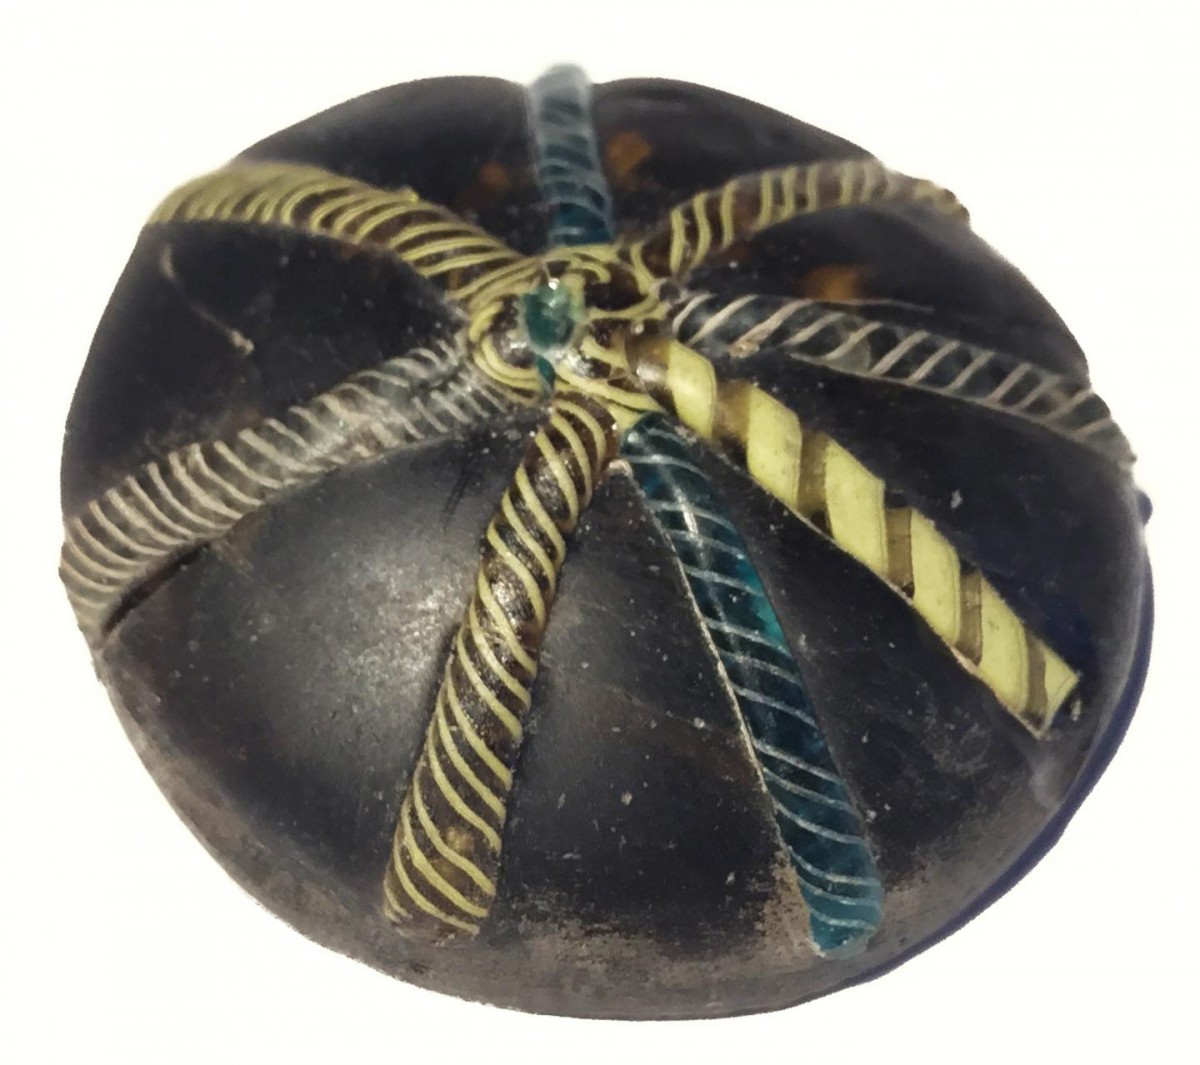 A glass counter decorated with twisted colorful strands was found at the site.
Credit: University of Sheffield